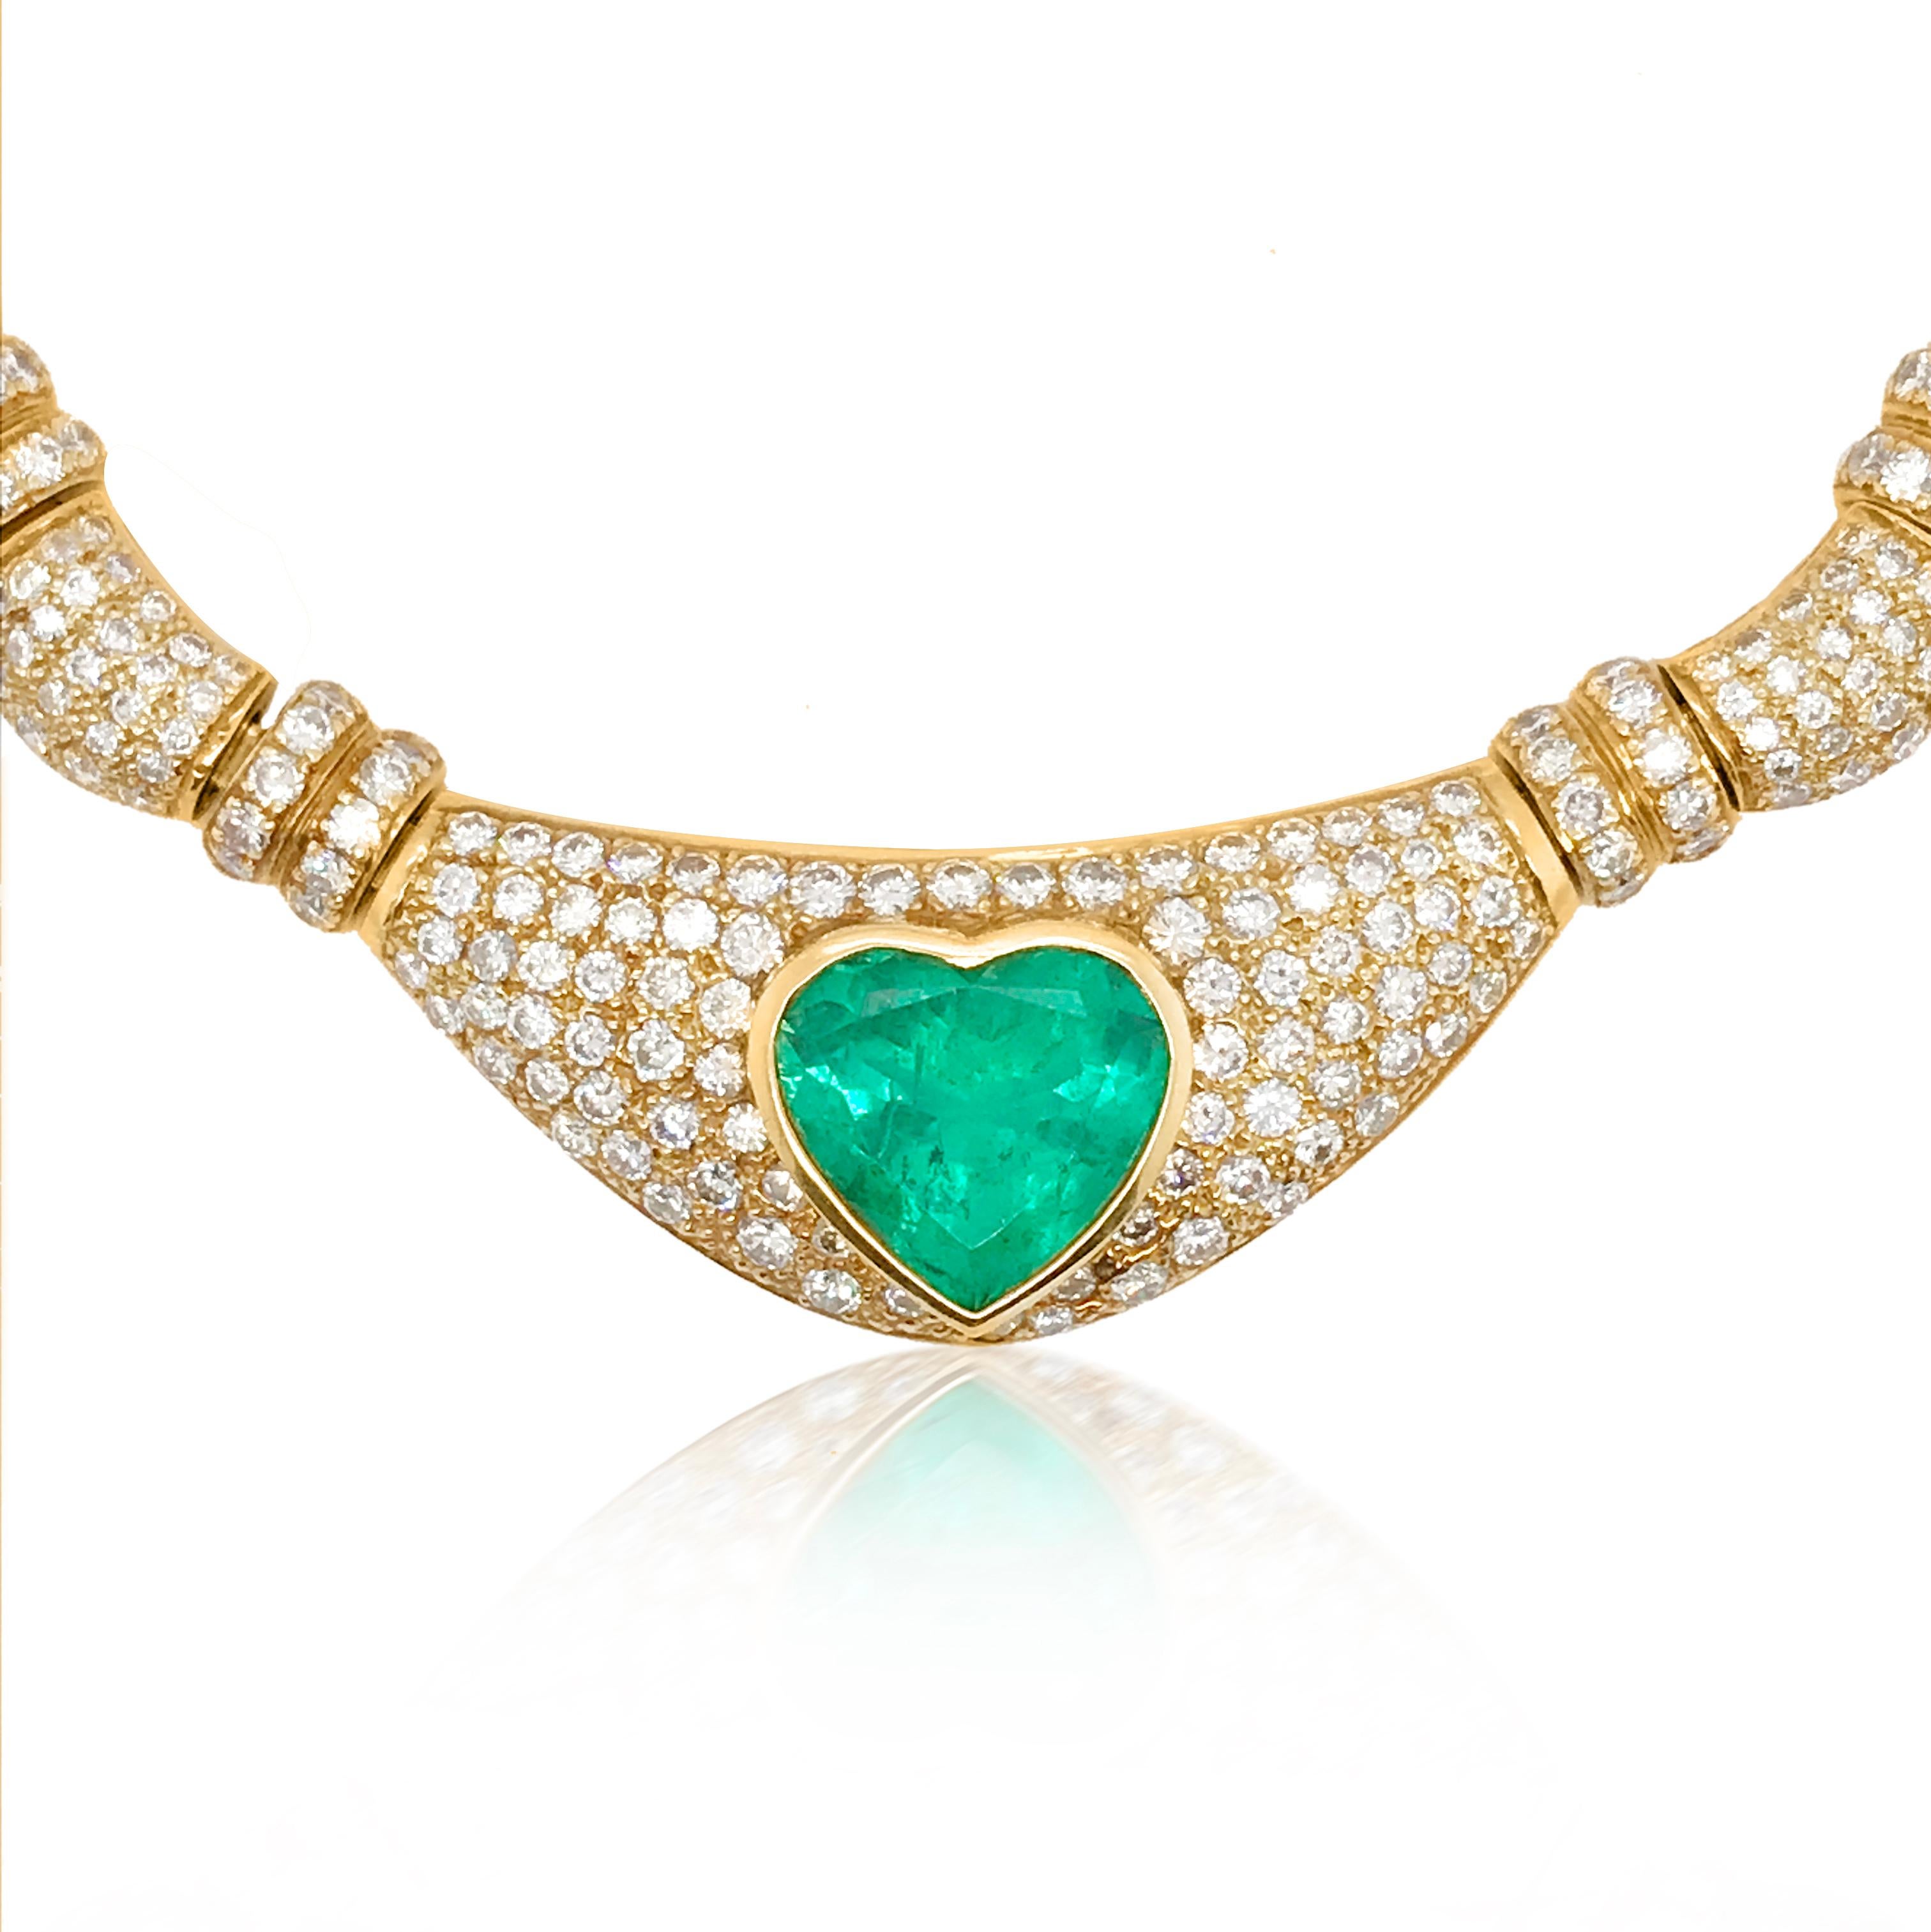 This gorgeous and alluring emerald and diamond necklace is crafted in 18K yellow gold, weighing 77.5 grams and center panel measuring 20.6x50.8mm (13/16 x 2 inches). It is centered with one heart-shaped genuine emerald weighing approx. 11.75 cts,